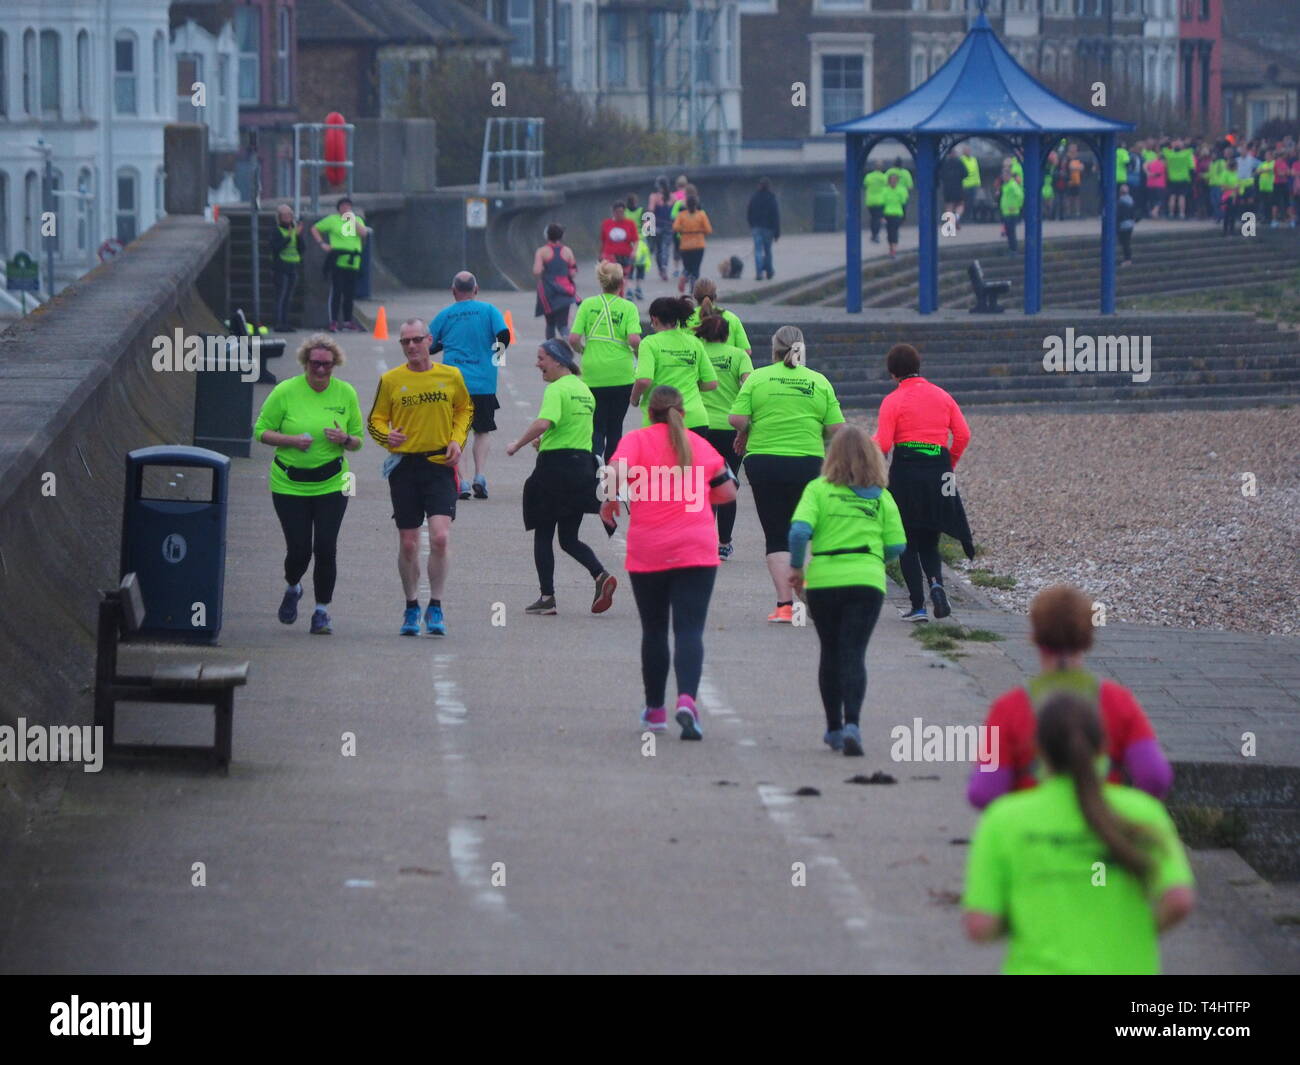 Sheerness, Kent, UK. 16th April, 2019. UK Weather: a misty evening with light winds in Sheerness, Kent. Hundreds of runners from local clubs in the region take part in a trial 'parkrun' to test the feasibility of setting up a weekly event along the seafront. Parkrun organise free, weekly, 5km timed runs around the world open to everyone. Credit: James Bell/Alamy Live News Stock Photo